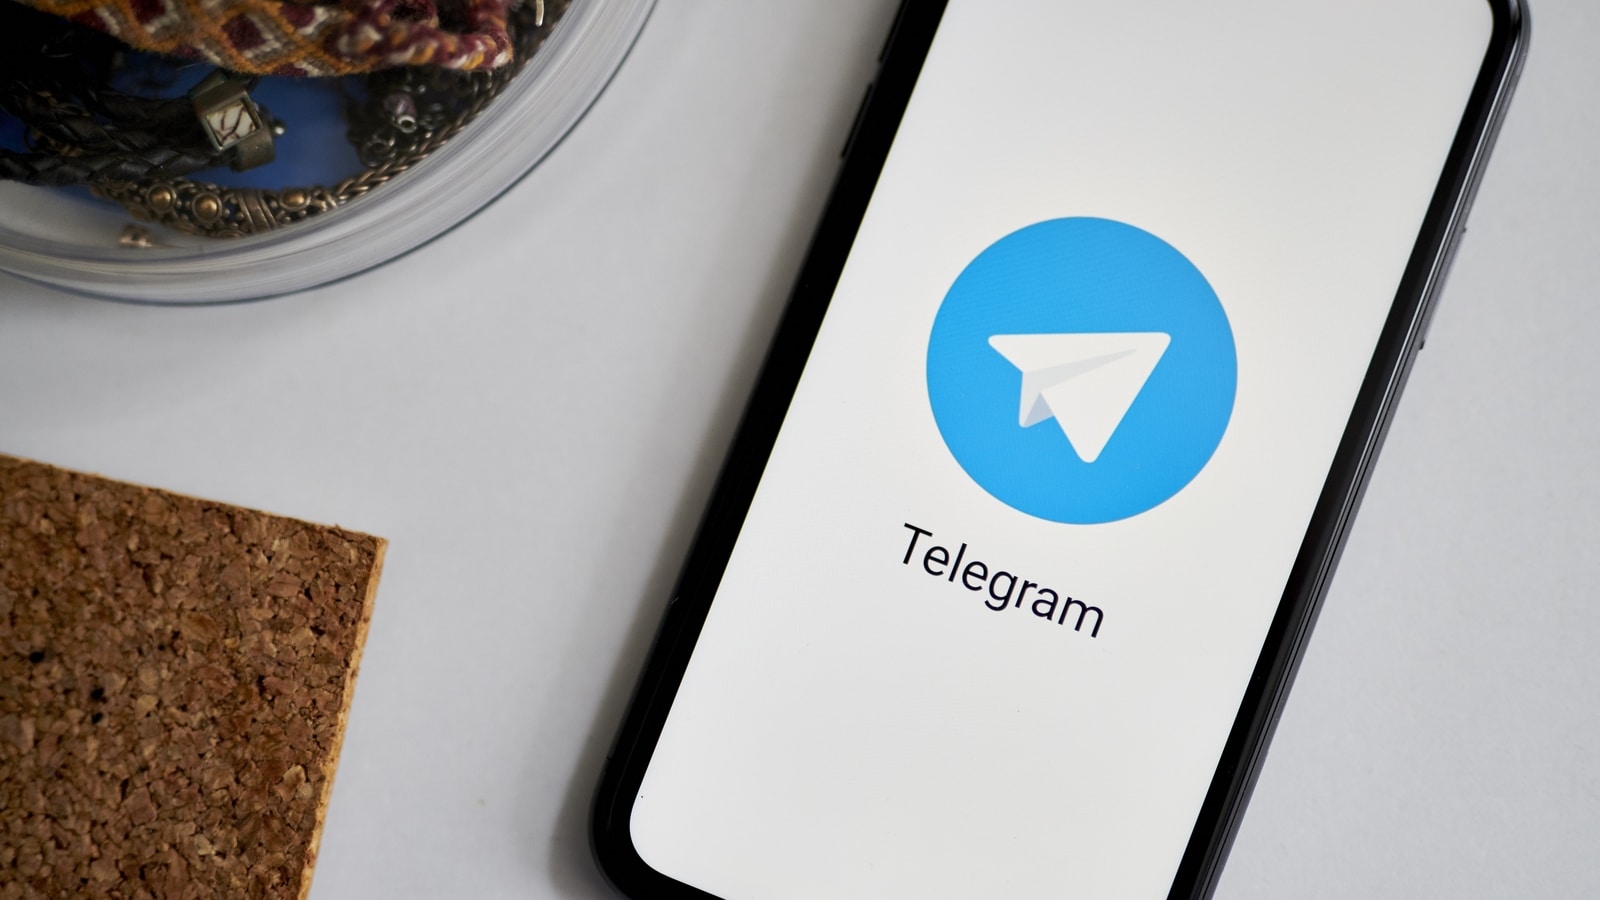 Telegram in the dark as to why fines in Russia were dropped; Google, YouTube, Meta got relief too